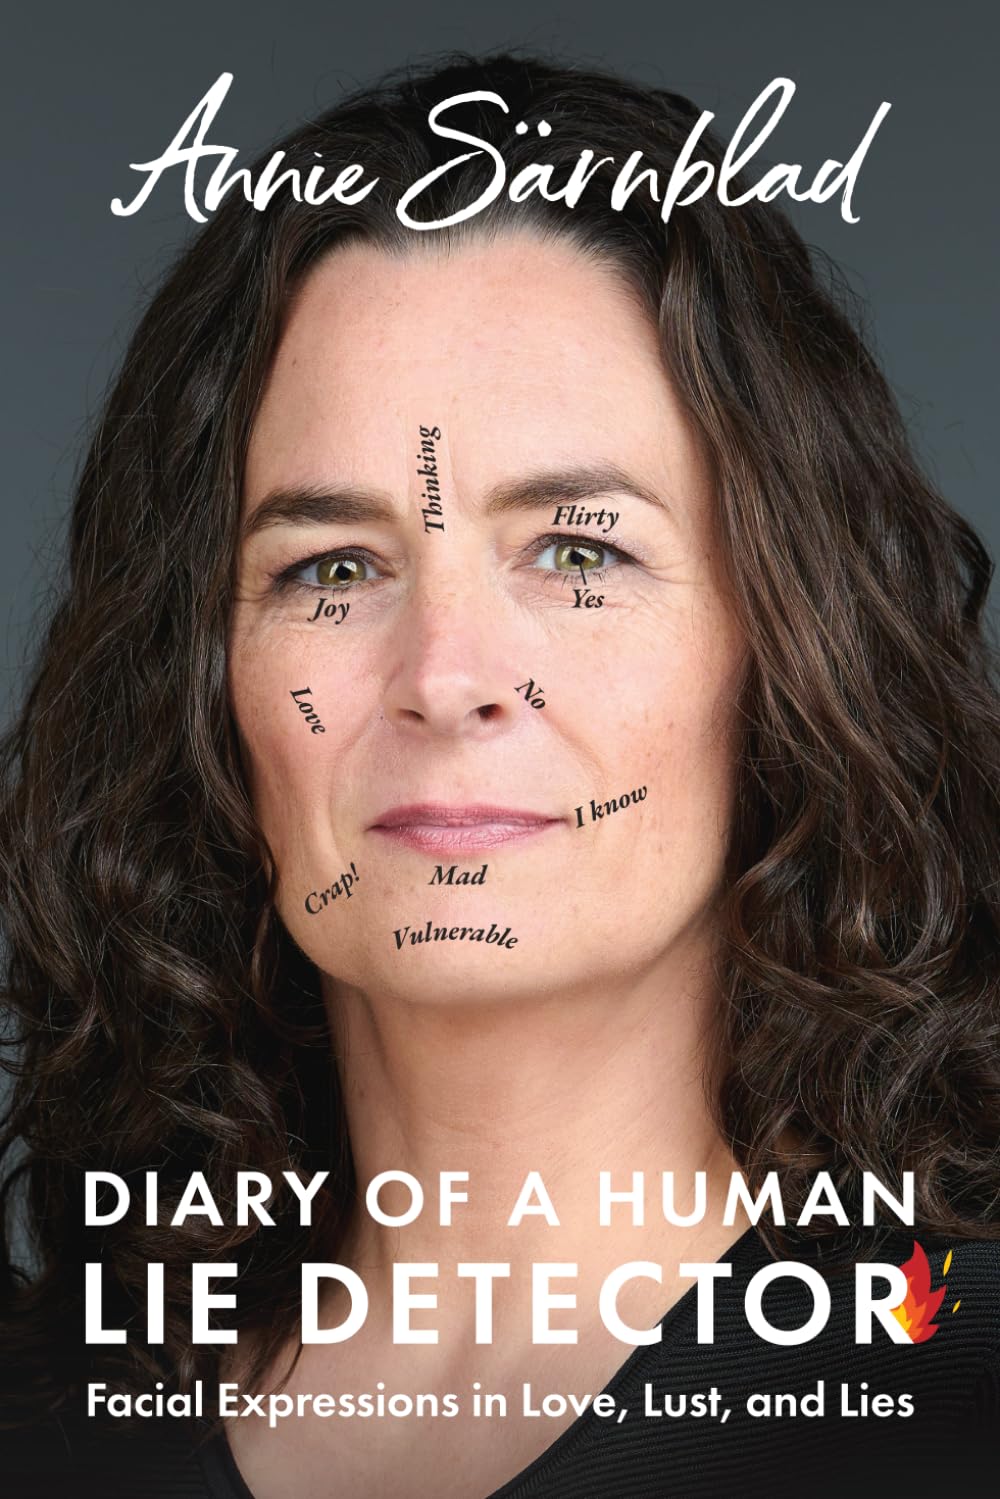 Diary of a Human Lie Detector: Facial Expressions in Love, Lust, and Lies by Sarnblad, Annie